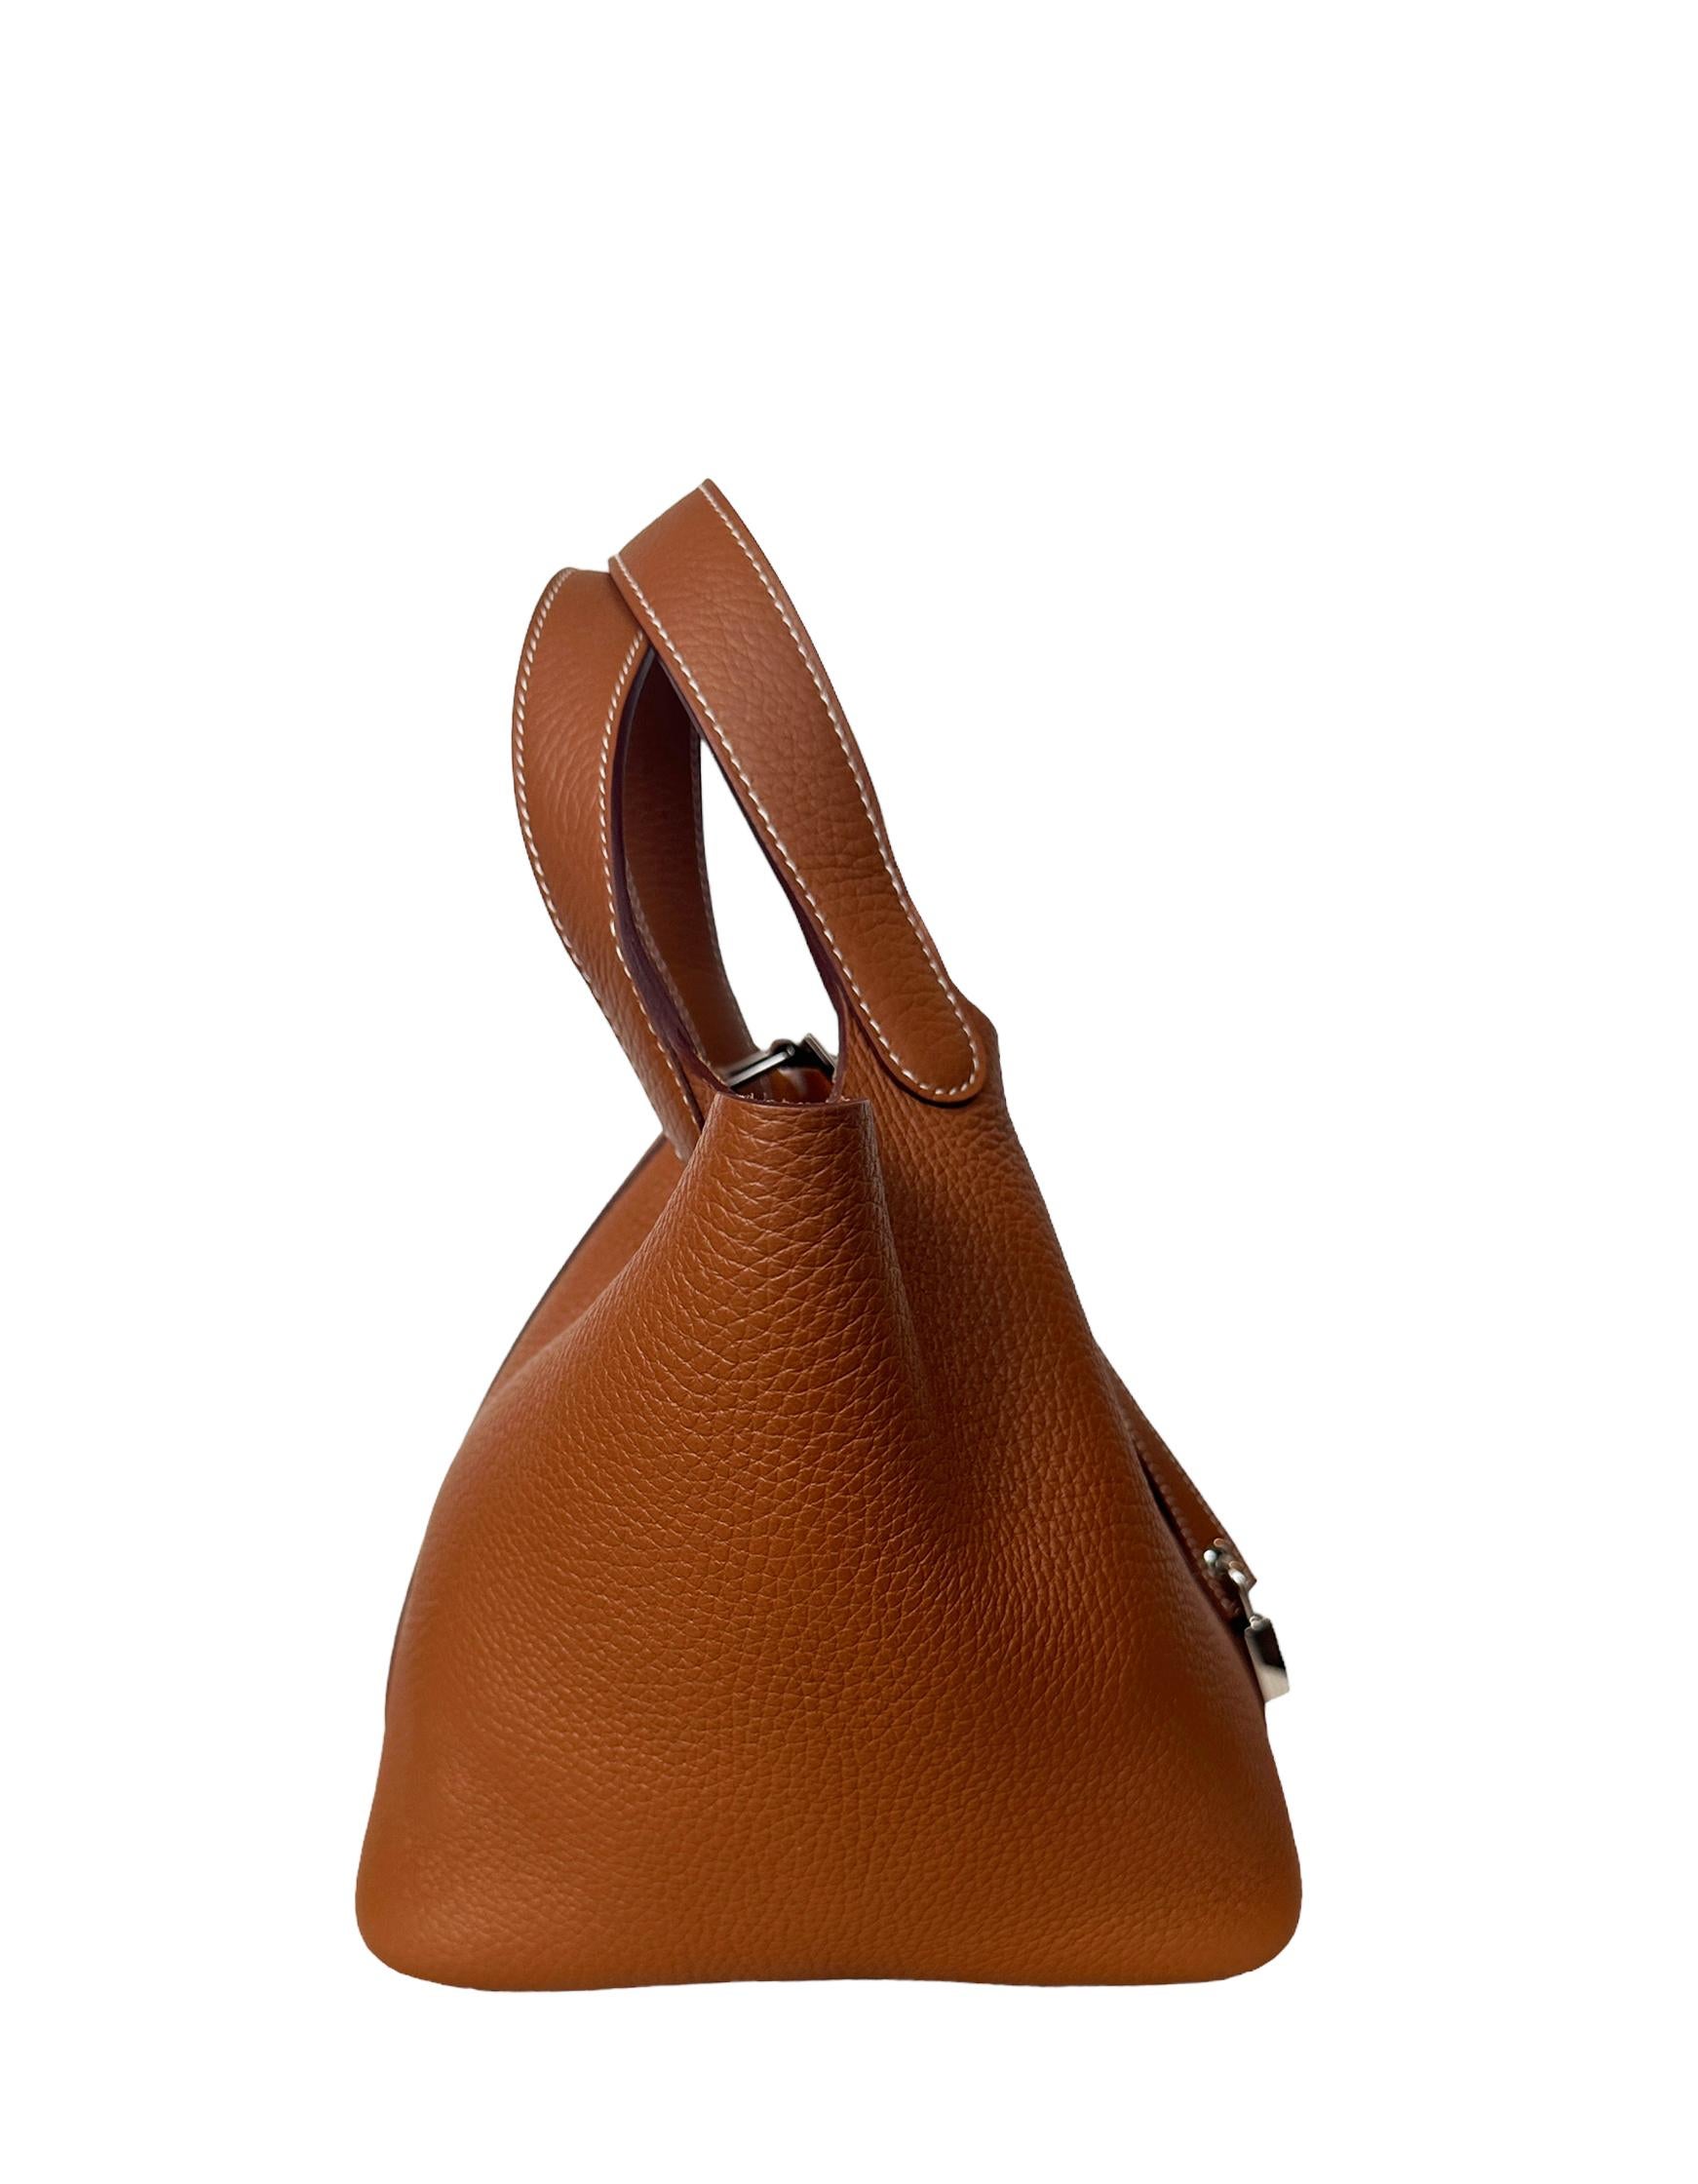 Hermes Gold Tan Taurillon Clemence Leather Picotin Lock 18 PM Bag For Sale 1